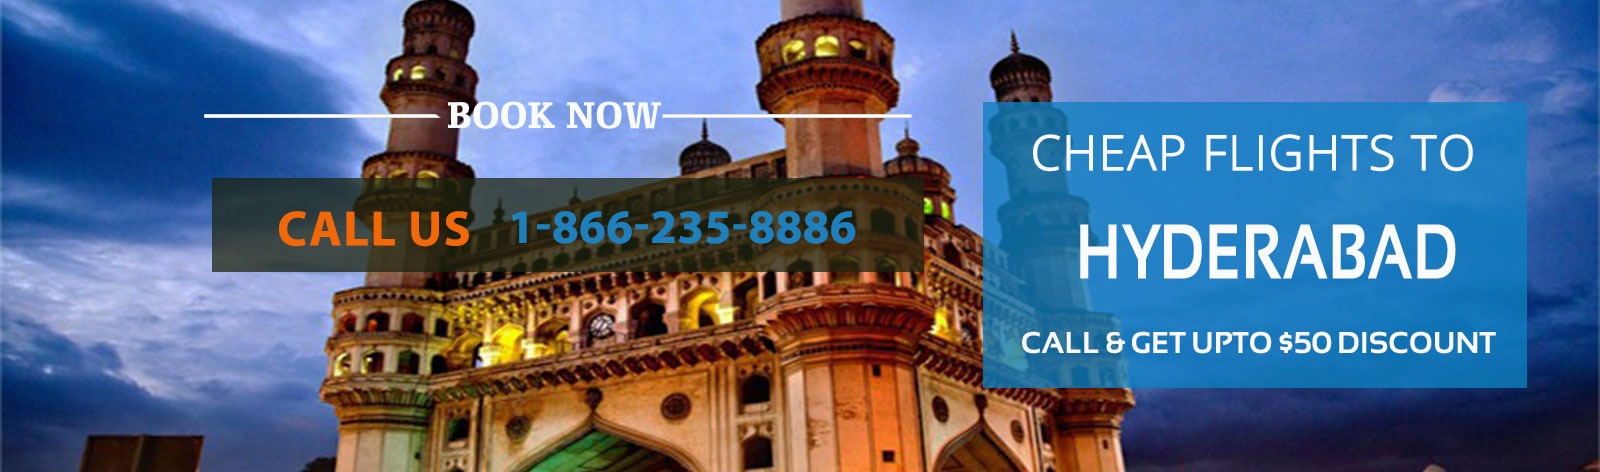 Flights From US To Hyderabad